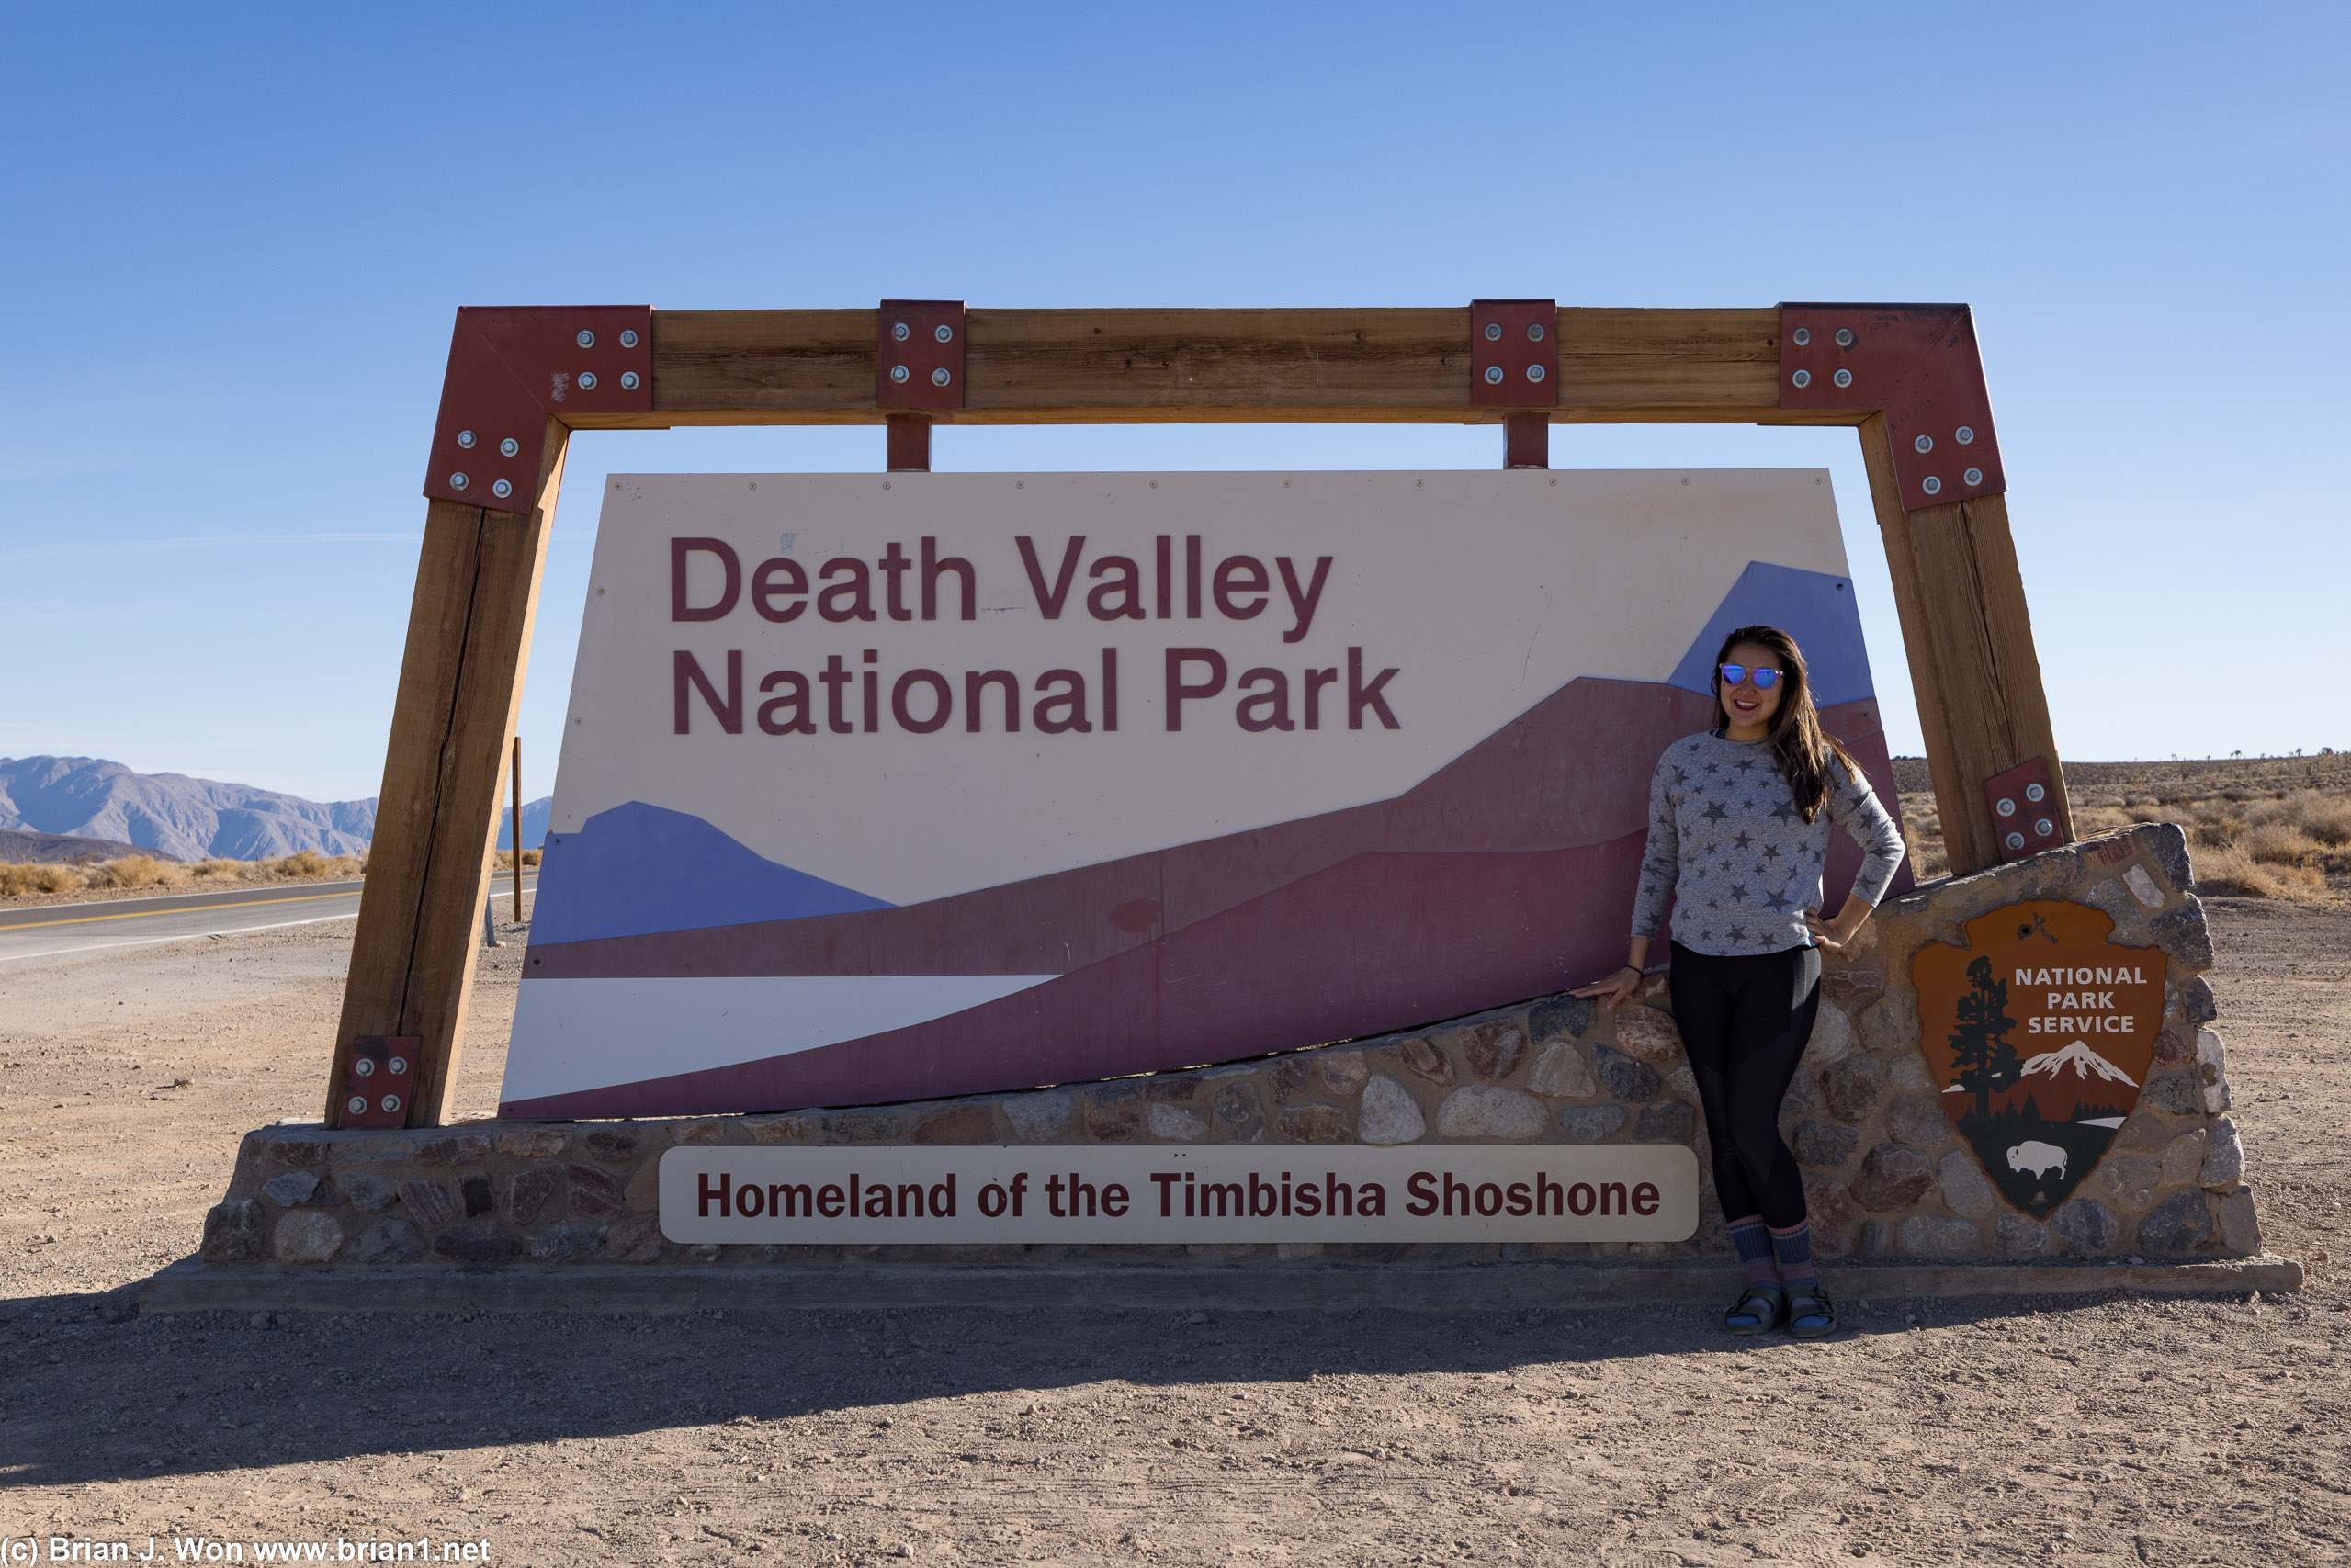 A little over 30 minutes to the entrance to Death Valley National Park, still over an hour into the park proper.